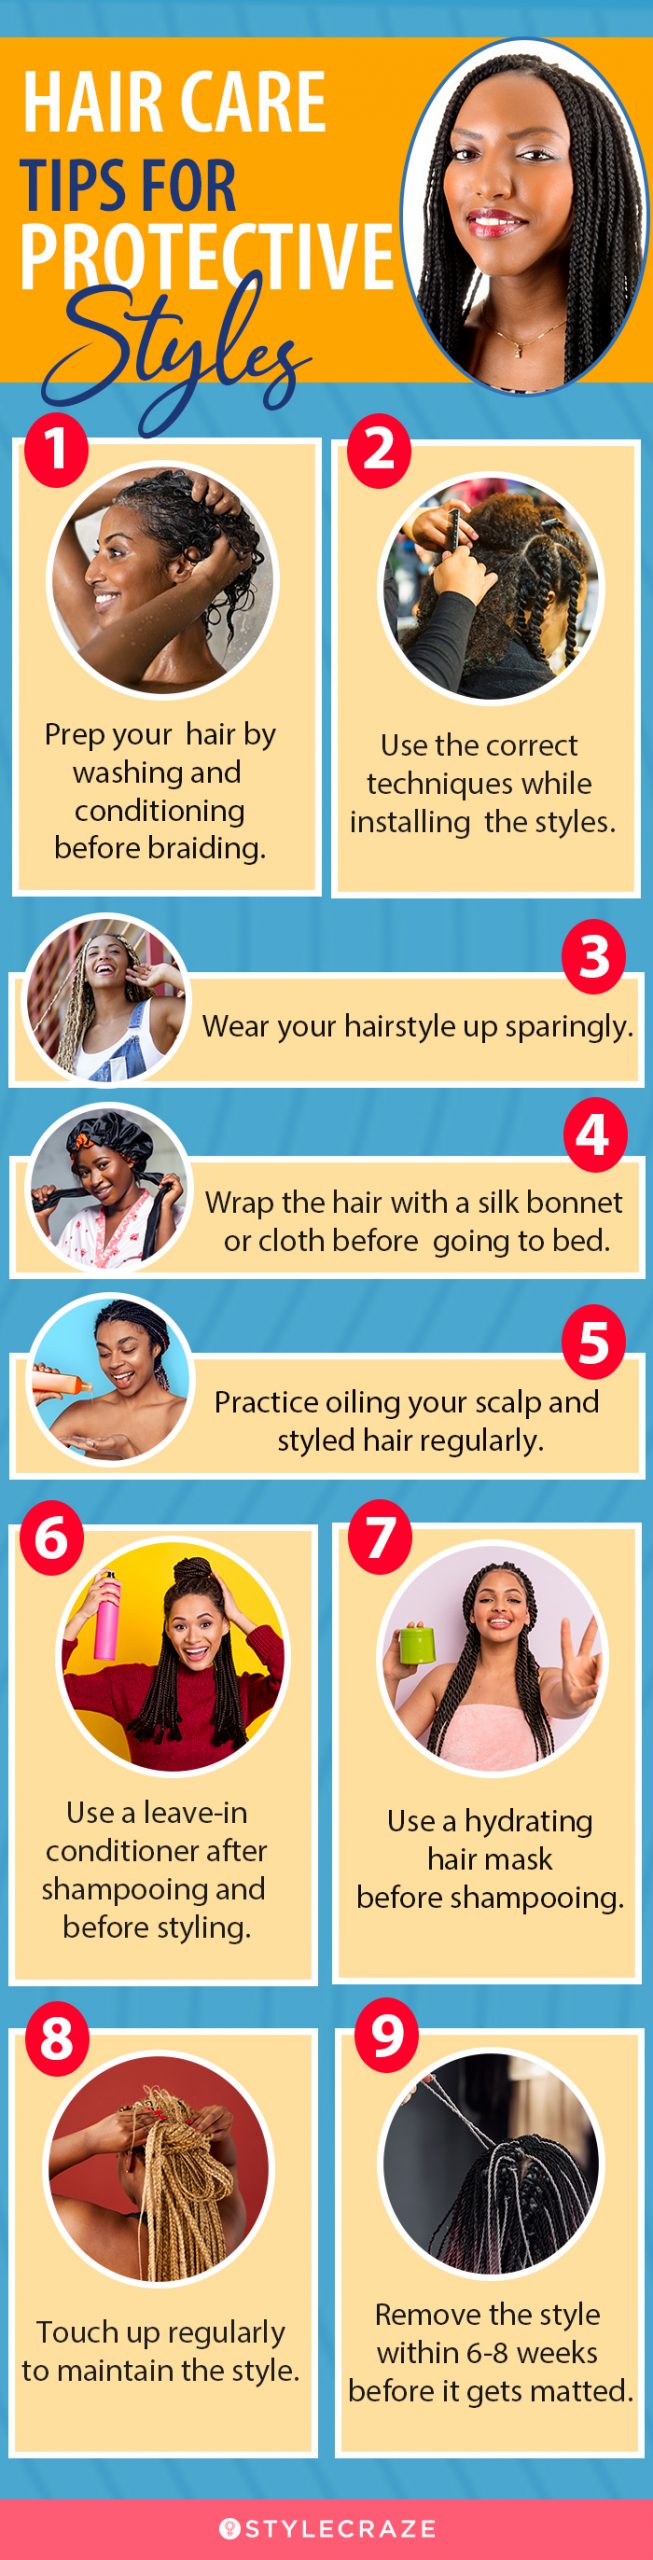 hair care tips for protective styles (infographic)